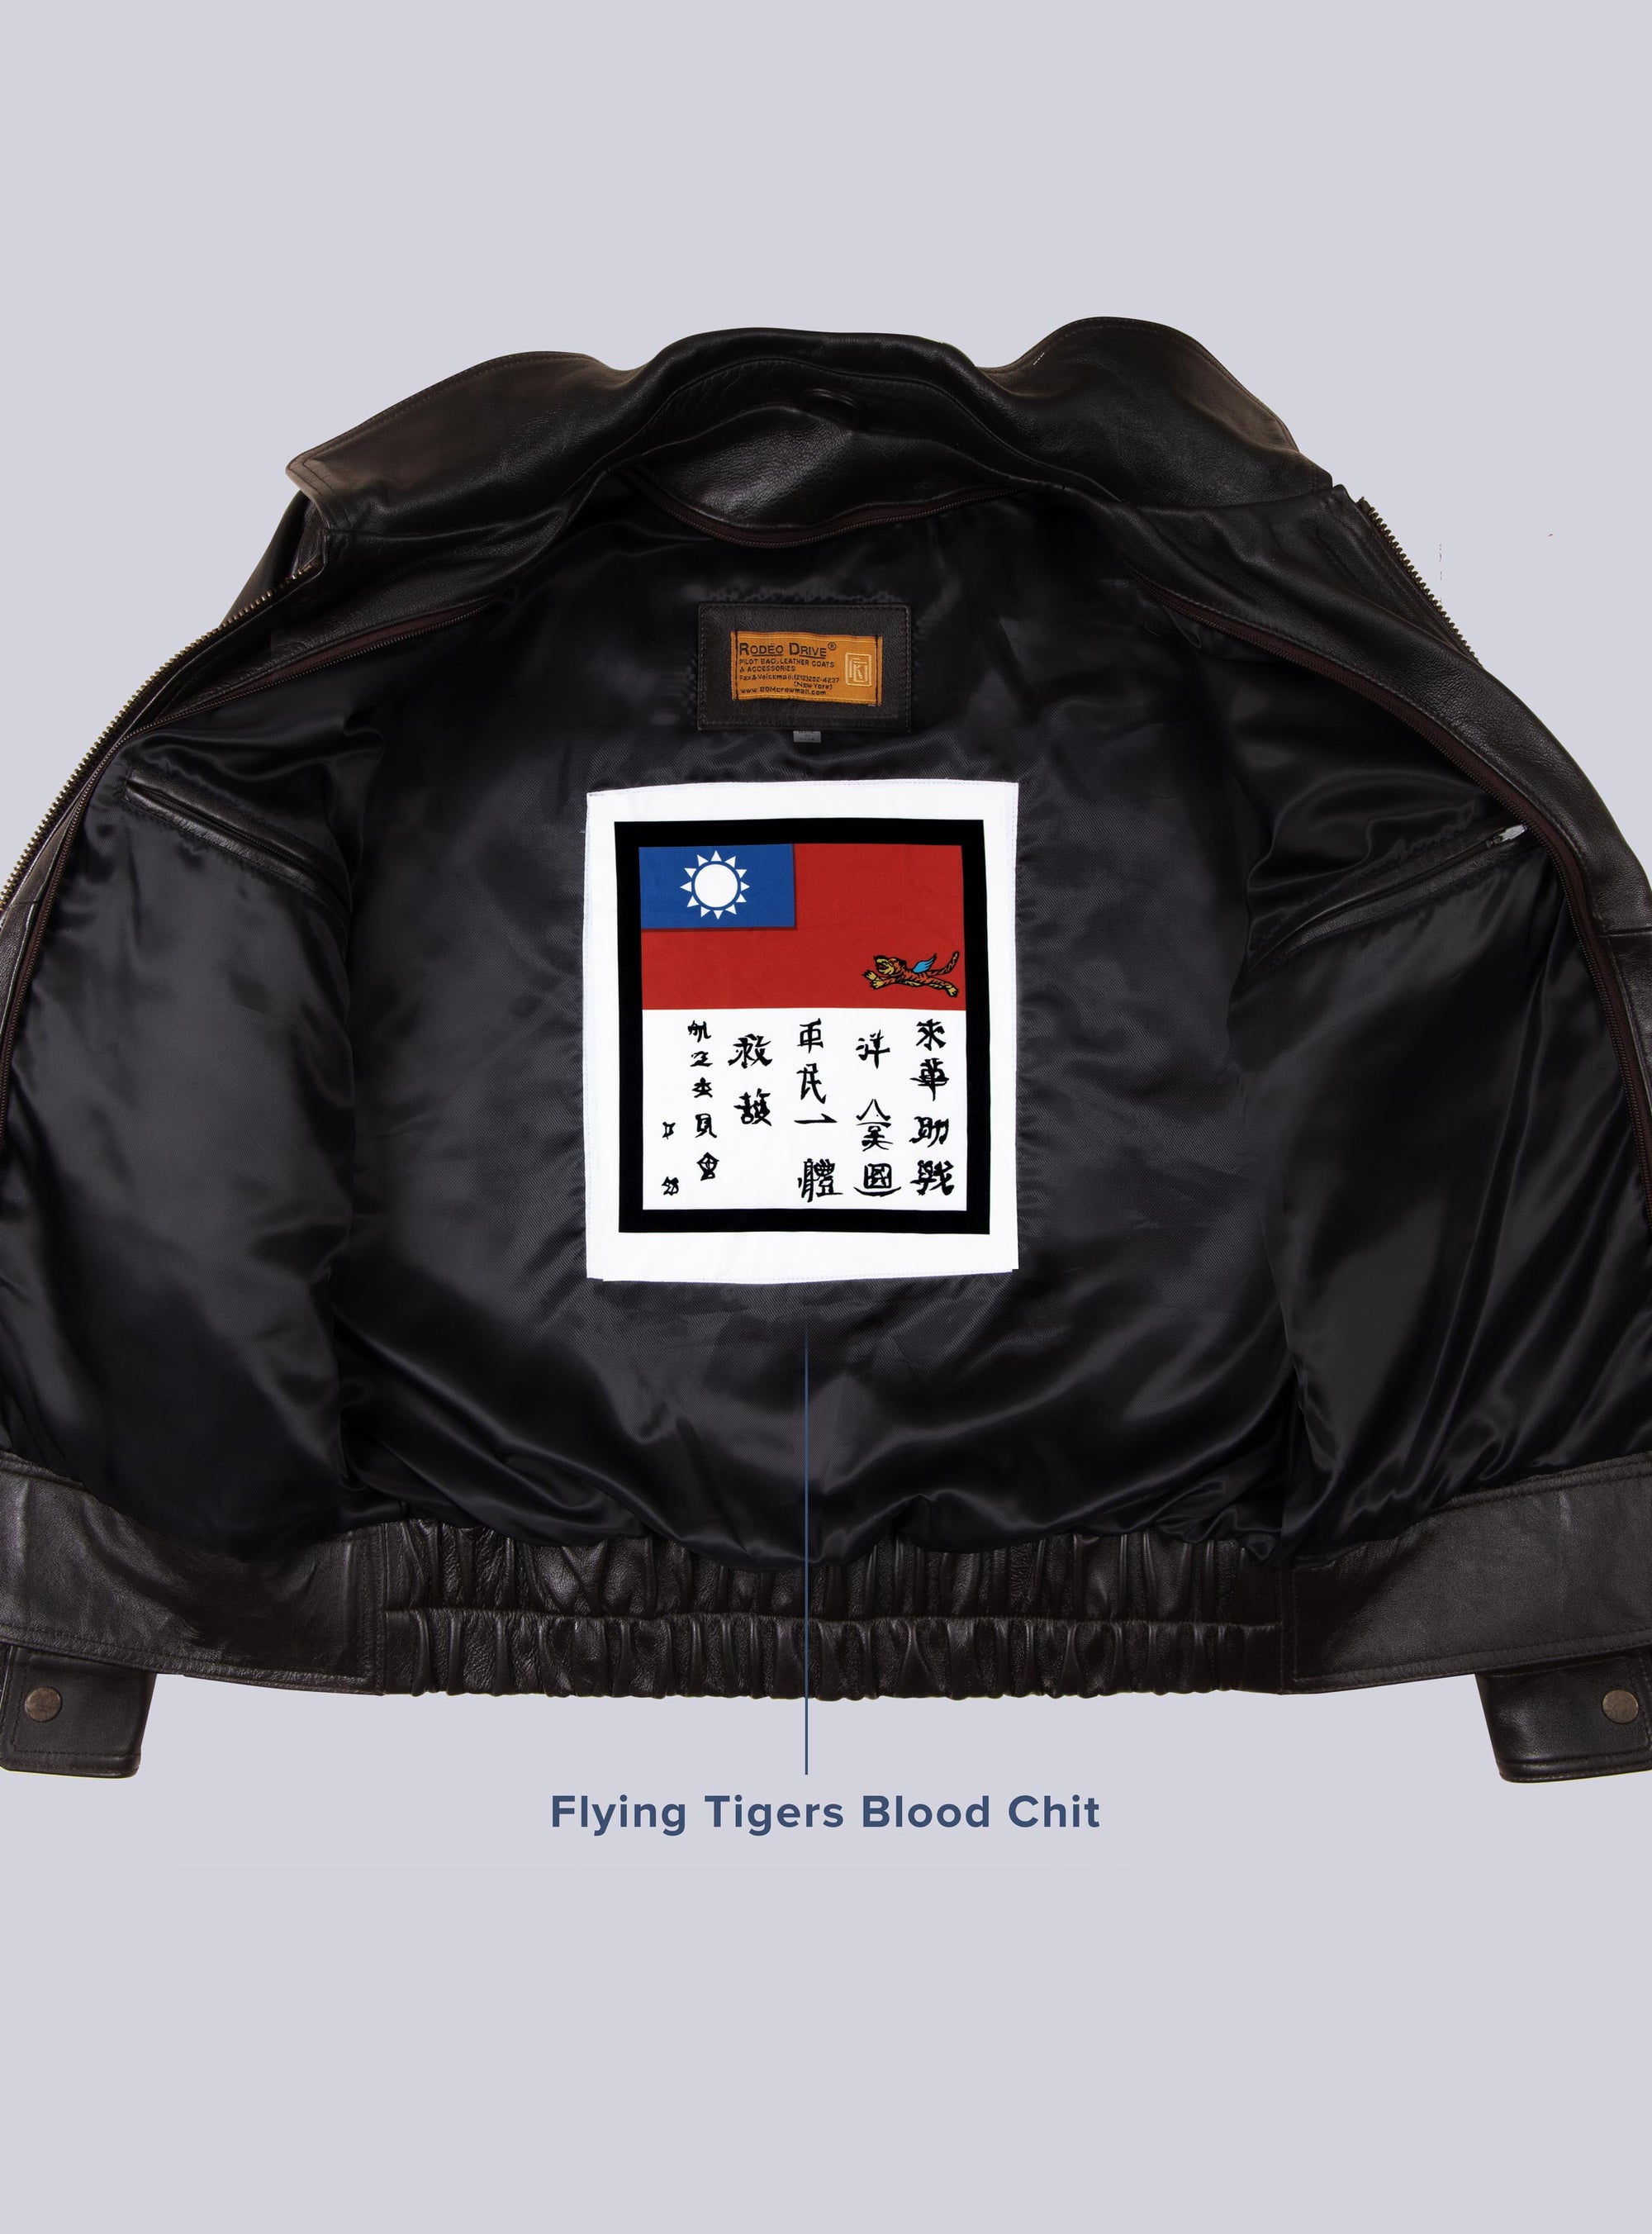 inside image of UPS BROWN  LEATHER JACKET for WOMEN. A flying tigers blood chit is sewed inside it.